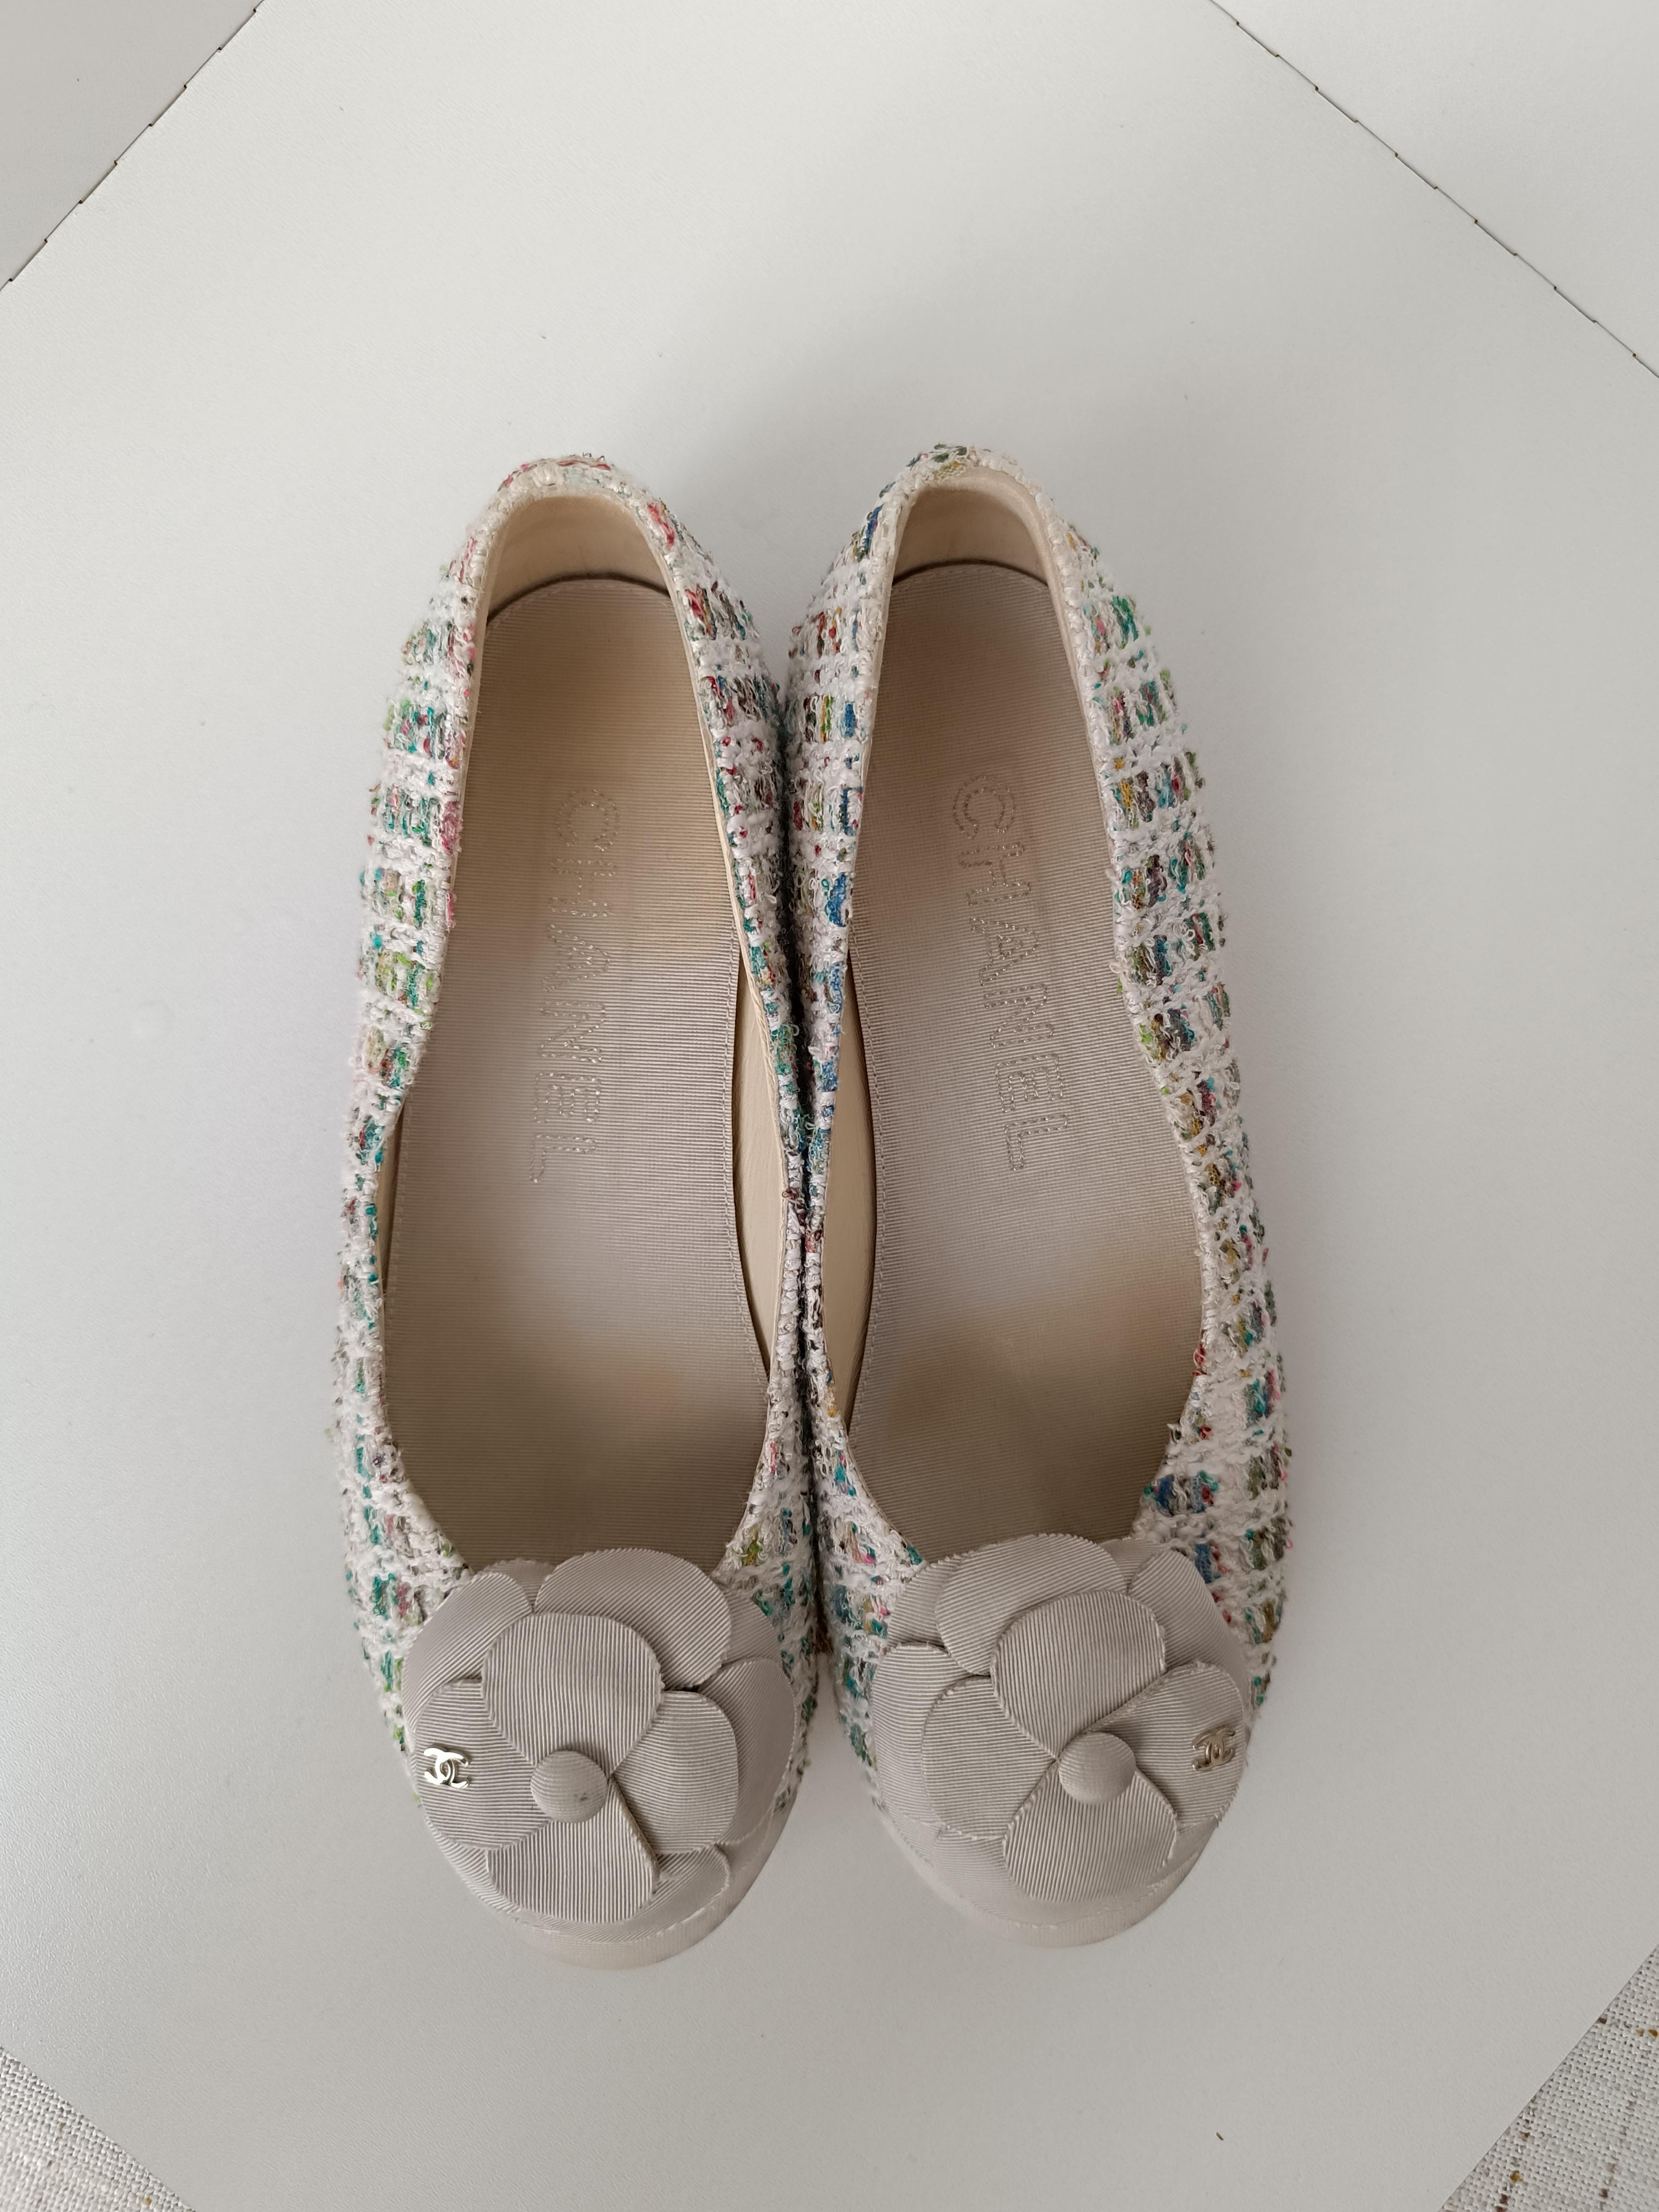 Chanel & Karl Lagerfeld Camellia TWEED Ballet Flats For Sale 12